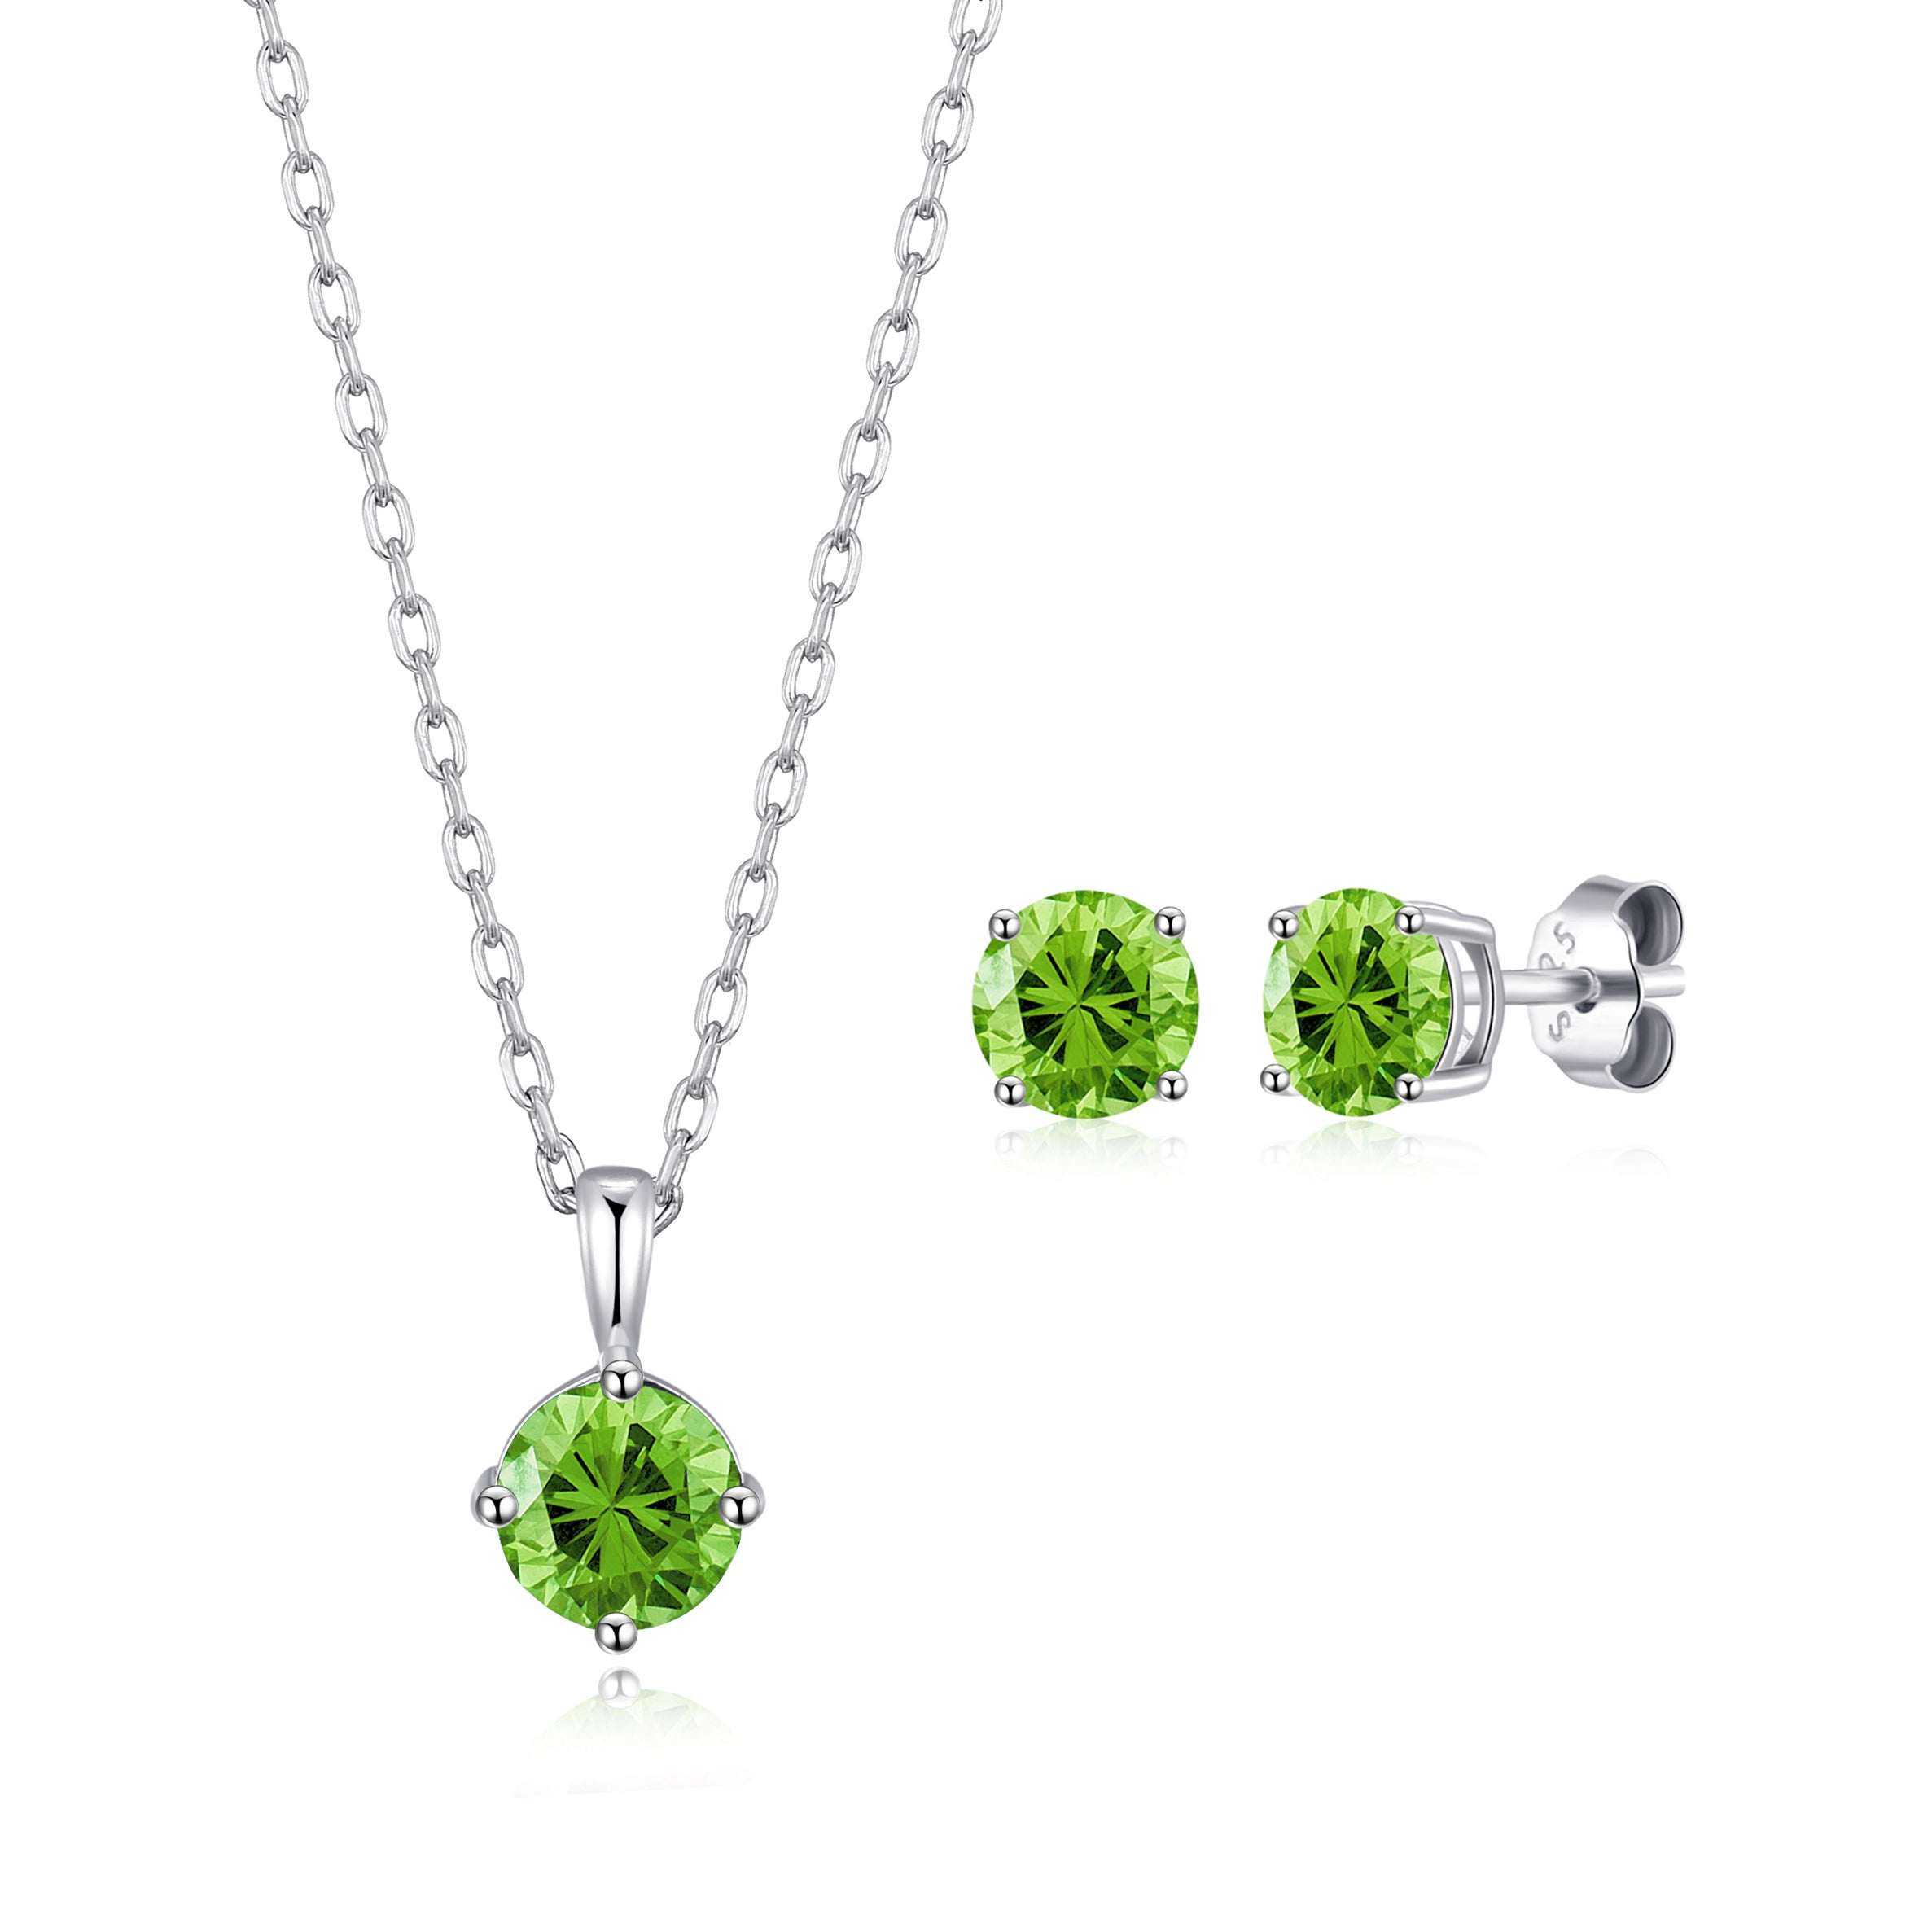 Sterling Silver August (Peridot) Birthstone Necklace & Earrings Set Created with Zircondia® Crystals by Philip Jones Jewellery